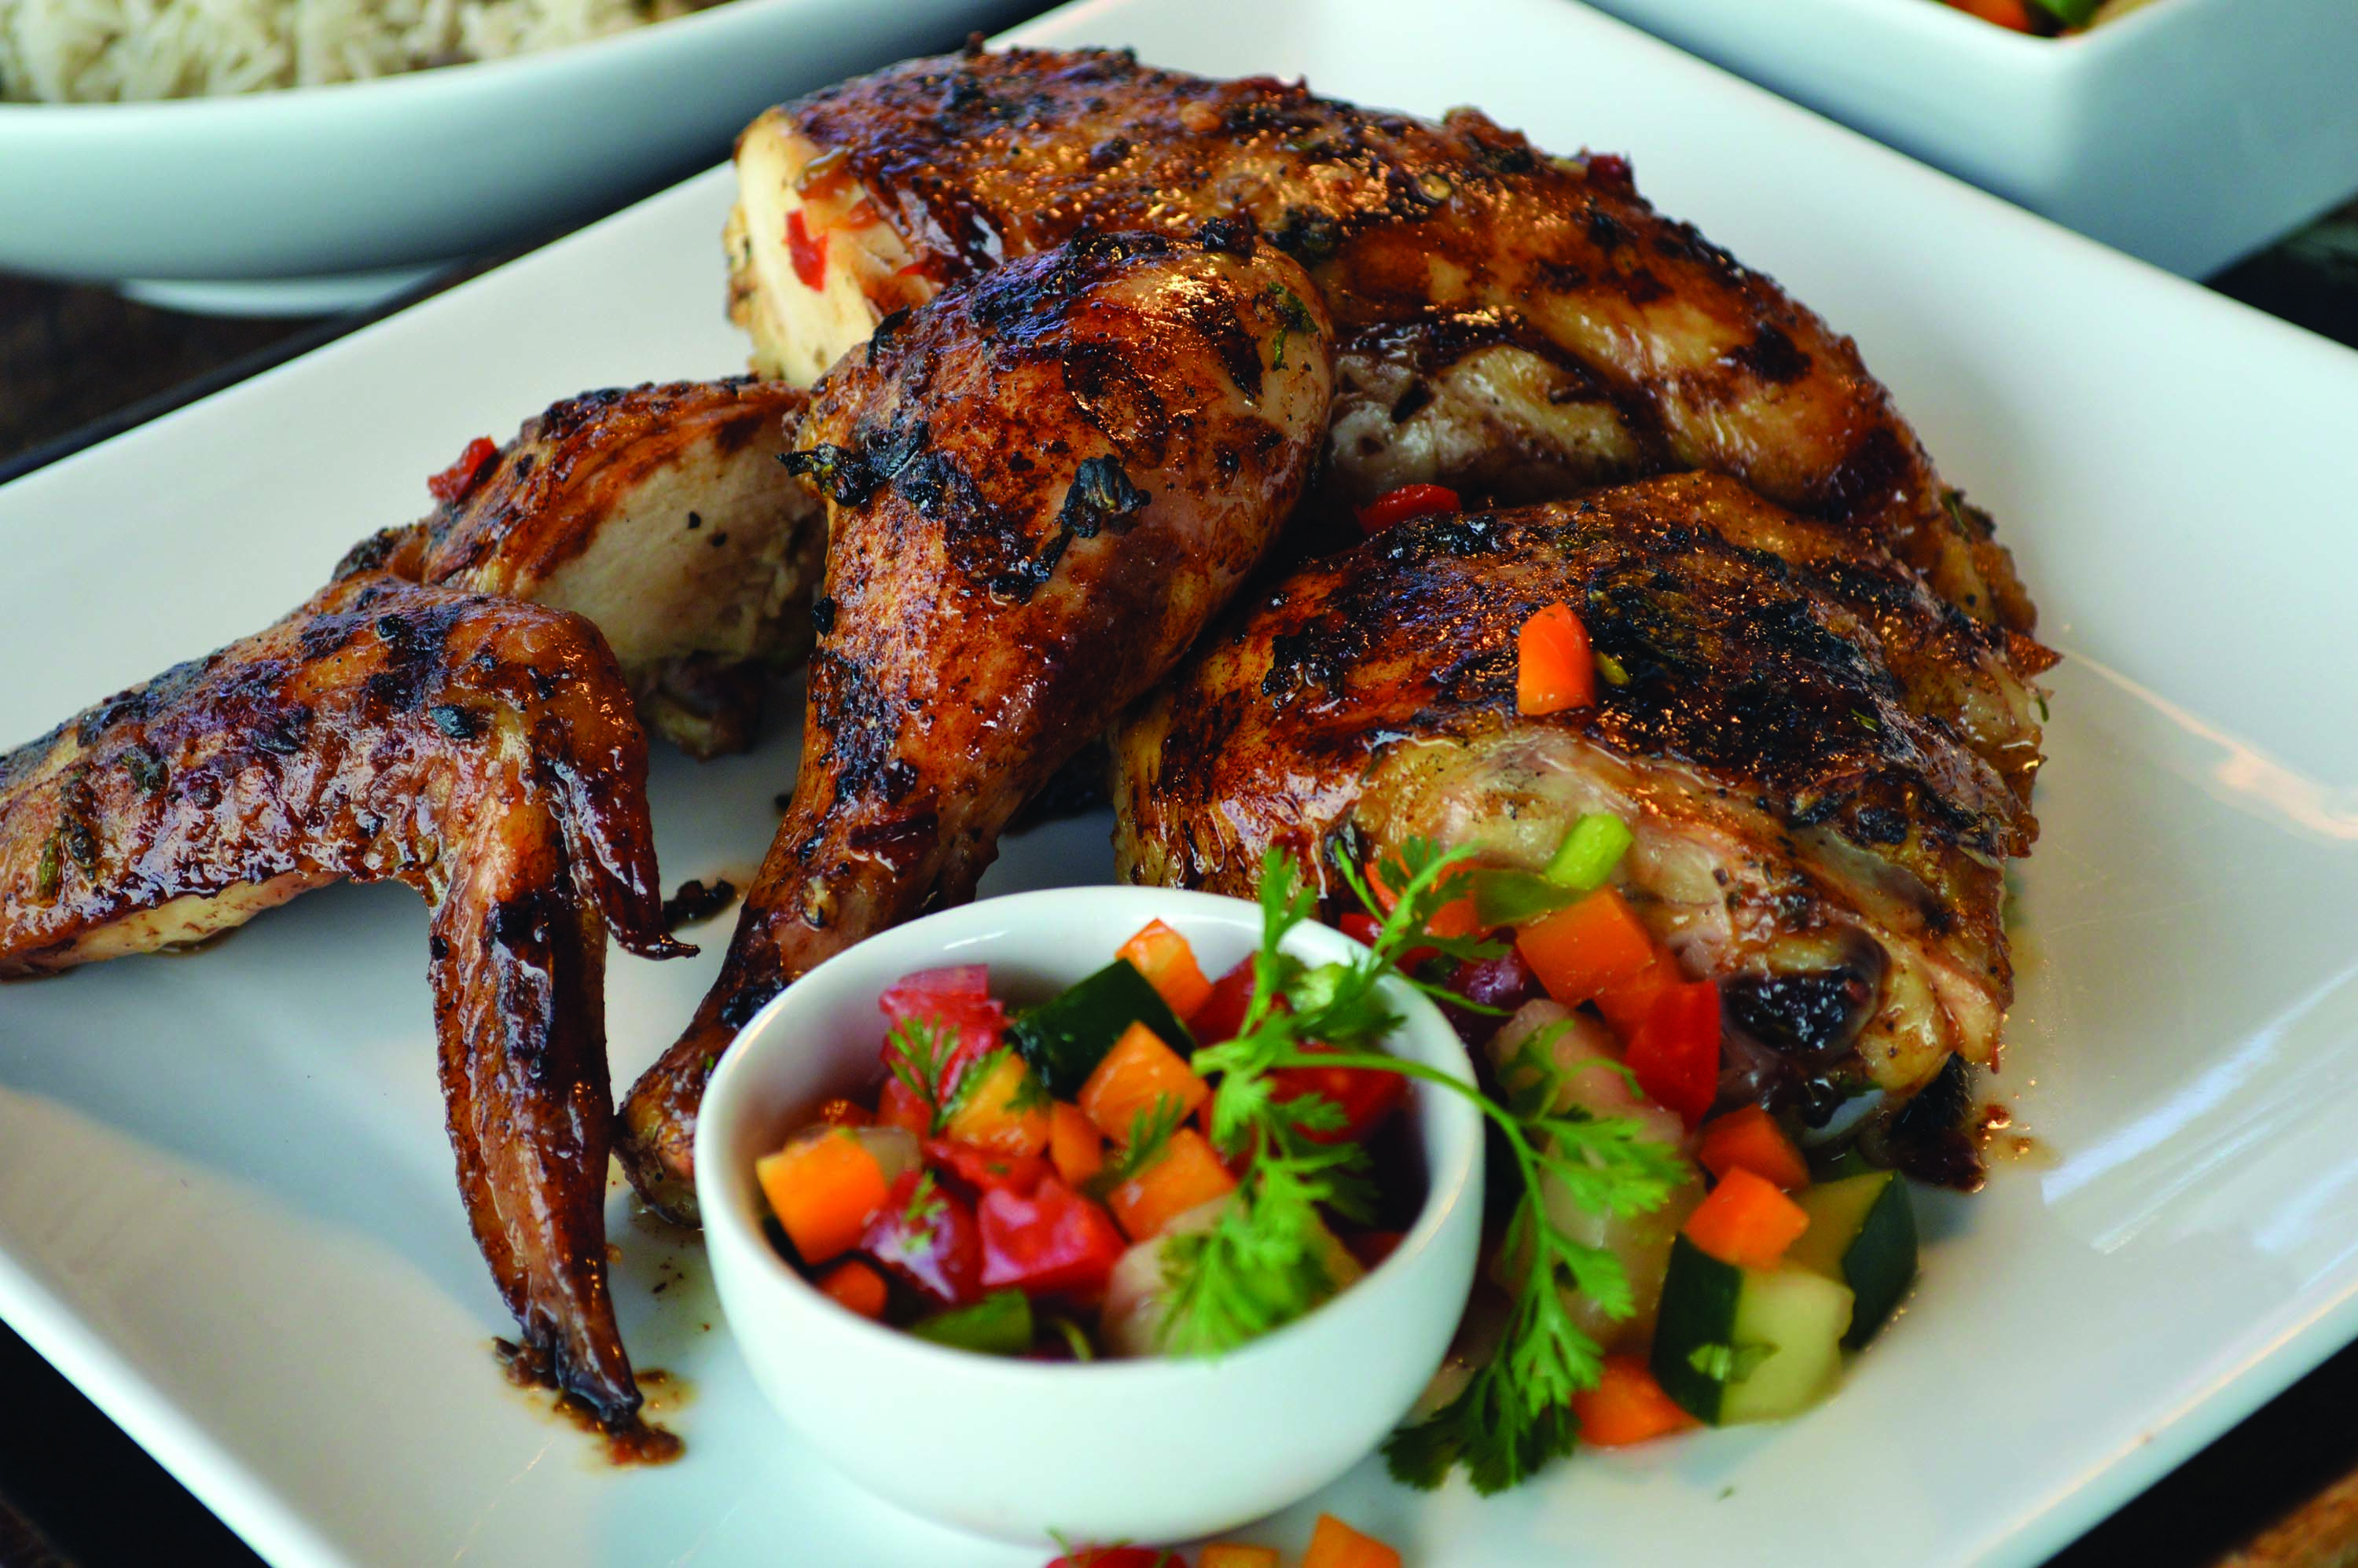 Elise Yap shares the story of Roadside Pan Chicken. Pictured here, her Original Grill Chicken